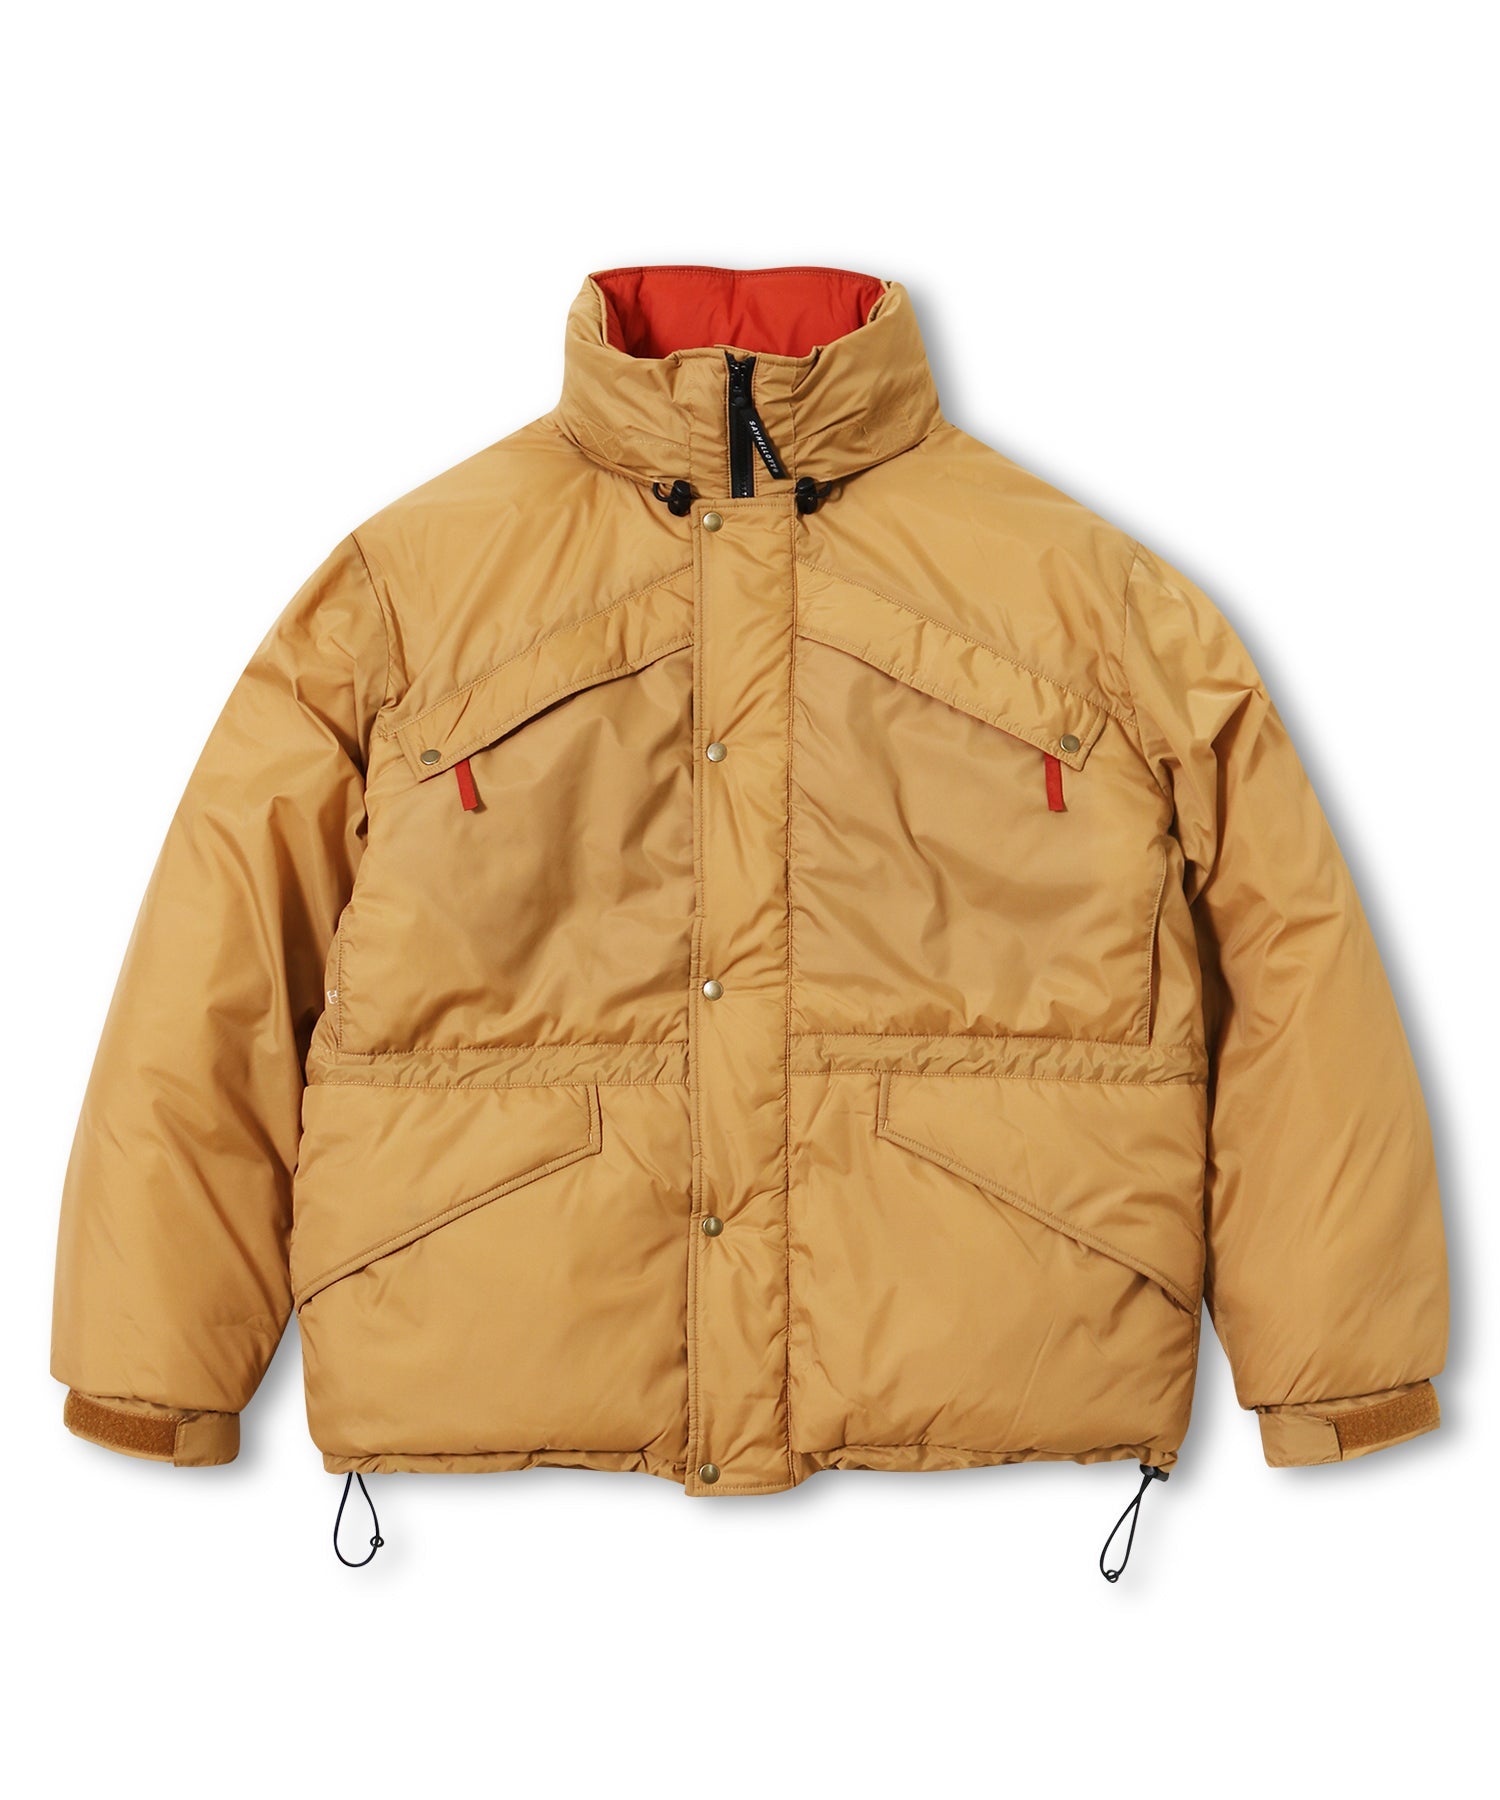 SAYHELLO x BURLAP OUTFITTER x COMMON EDUCATION - NQ3 JACKET / エヌ 